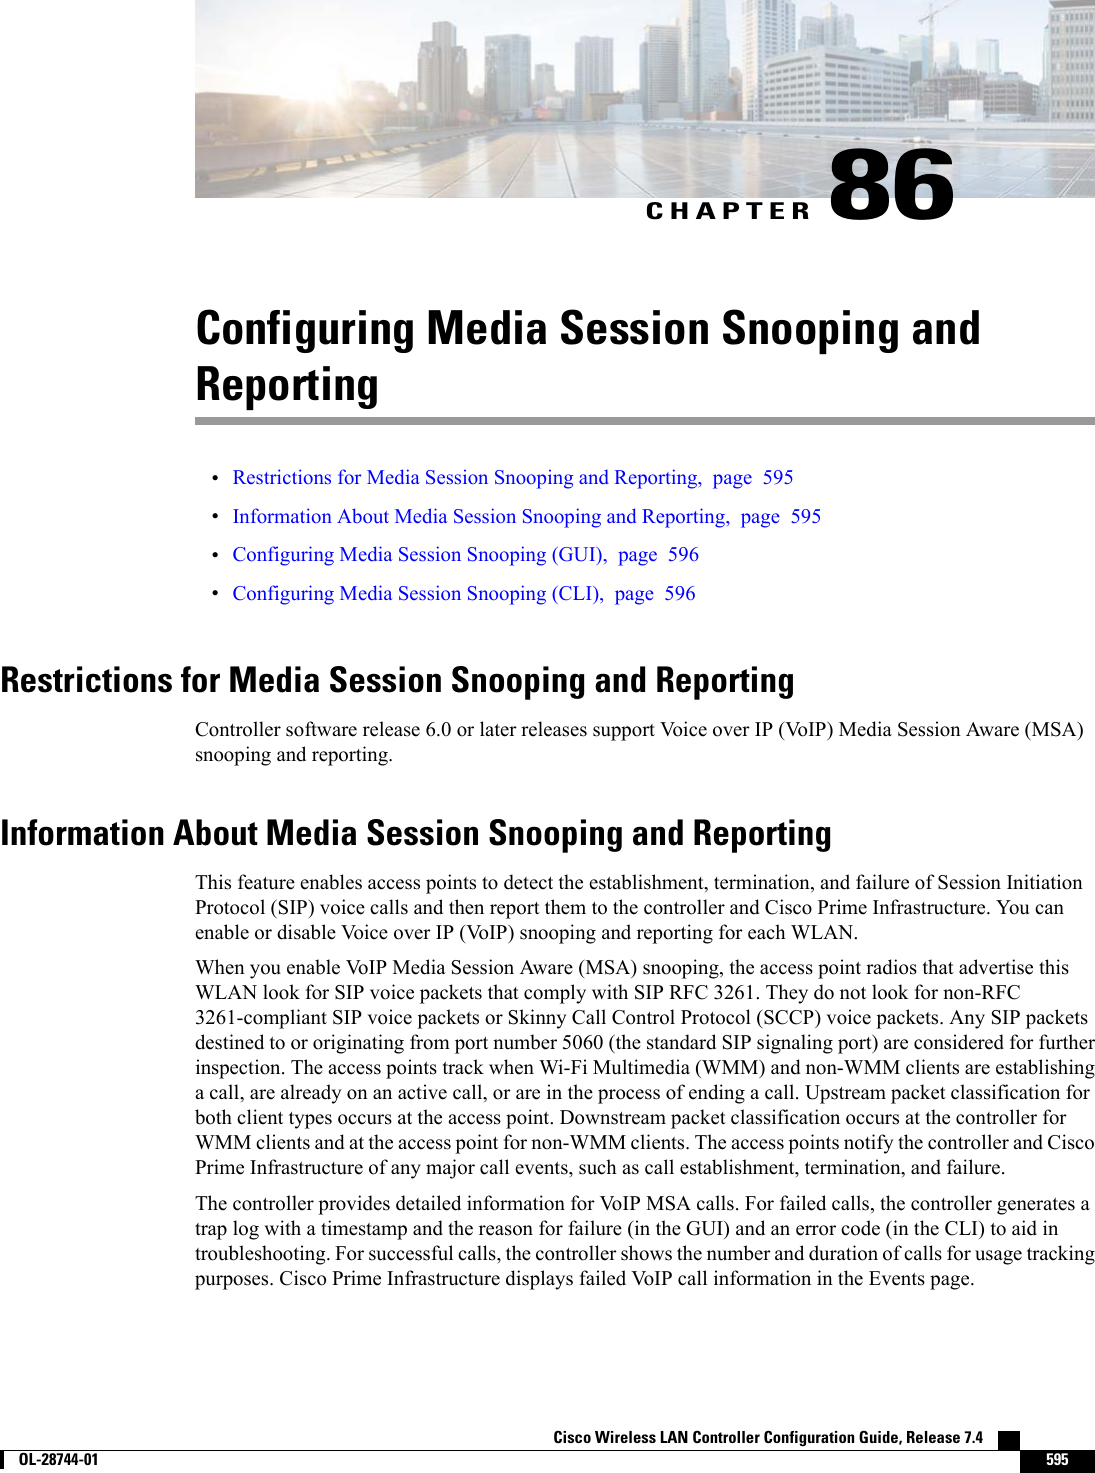 CHAPTER 86Configuring Media Session Snooping andReporting•Restrictions for Media Session Snooping and Reporting, page 595•Information About Media Session Snooping and Reporting, page 595•Configuring Media Session Snooping (GUI), page 596•Configuring Media Session Snooping (CLI), page 596Restrictions for Media Session Snooping and ReportingController software release 6.0 or later releases support Voice over IP (VoIP) Media Session Aware (MSA)snooping and reporting.Information About Media Session Snooping and ReportingThis feature enables access points to detect the establishment, termination, and failure of Session InitiationProtocol (SIP) voice calls and then report them to the controller and Cisco Prime Infrastructure. You canenable or disable Voice over IP (VoIP) snooping and reporting for each WLAN.When you enable VoIP Media Session Aware (MSA) snooping, the access point radios that advertise thisWLAN look for SIP voice packets that comply with SIP RFC 3261. They do not look for non-RFC3261-compliant SIP voice packets or Skinny Call Control Protocol (SCCP) voice packets. Any SIP packetsdestined to or originating from port number 5060 (the standard SIP signaling port) are considered for furtherinspection. The access points track when Wi-Fi Multimedia (WMM) and non-WMM clients are establishinga call, are already on an active call, or are in the process of ending a call. Upstream packet classification forboth client types occurs at the access point. Downstream packet classification occurs at the controller forWMM clients and at the access point for non-WMM clients. The access points notify the controller and CiscoPrime Infrastructure of any major call events, such as call establishment, termination, and failure.The controller provides detailed information for VoIP MSA calls. For failed calls, the controller generates atrap log with a timestamp and the reason for failure (in the GUI) and an error code (in the CLI) to aid introubleshooting. For successful calls, the controller shows the number and duration of calls for usage trackingpurposes. Cisco Prime Infrastructure displays failed VoIP call information in the Events page.Cisco Wireless LAN Controller Configuration Guide, Release 7.4        OL-28744-01 595